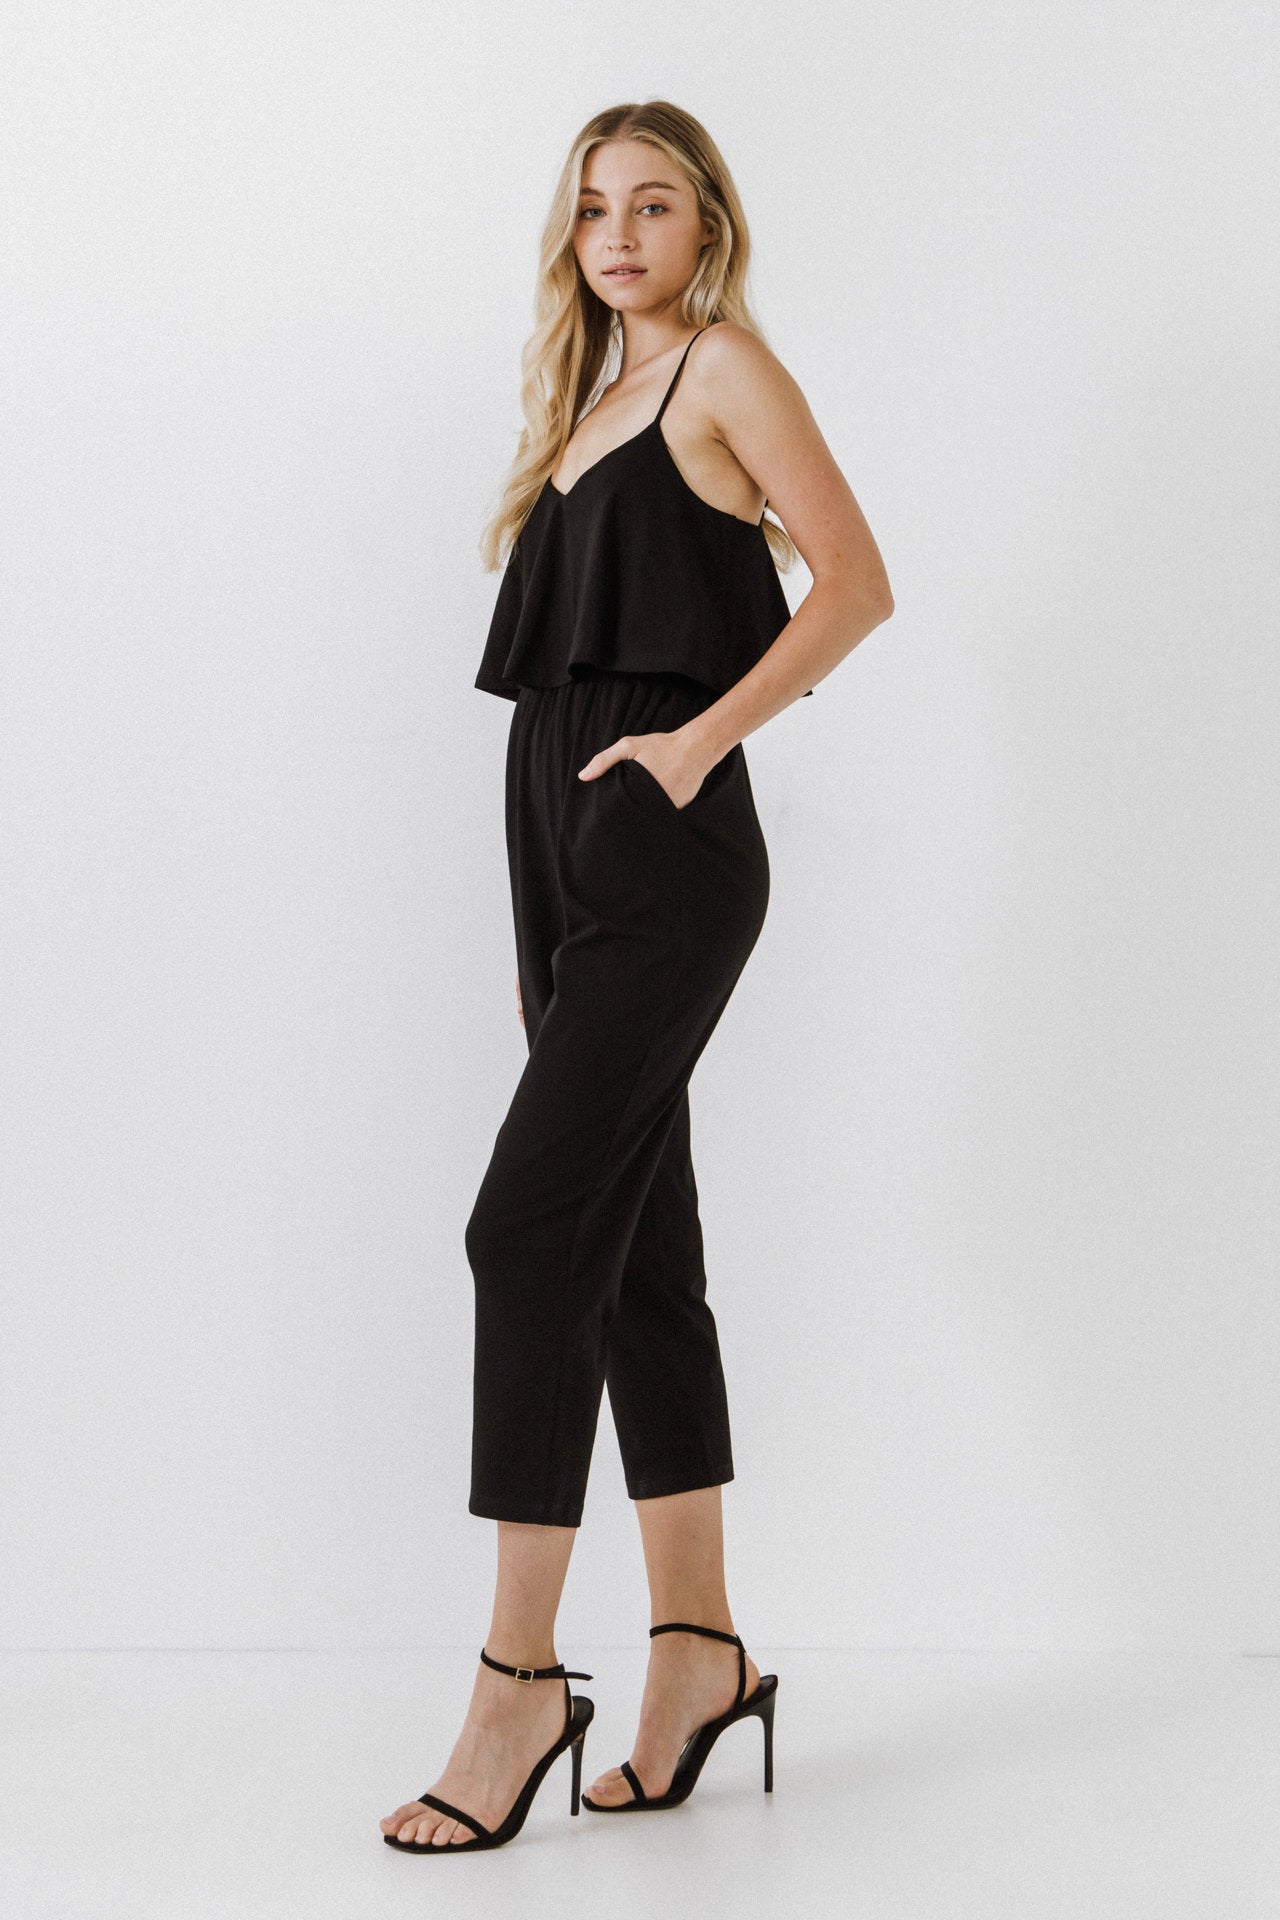 LA'VEN - Knit Sleeveless Jumpsuit - JUMPSUITS available at Objectrare